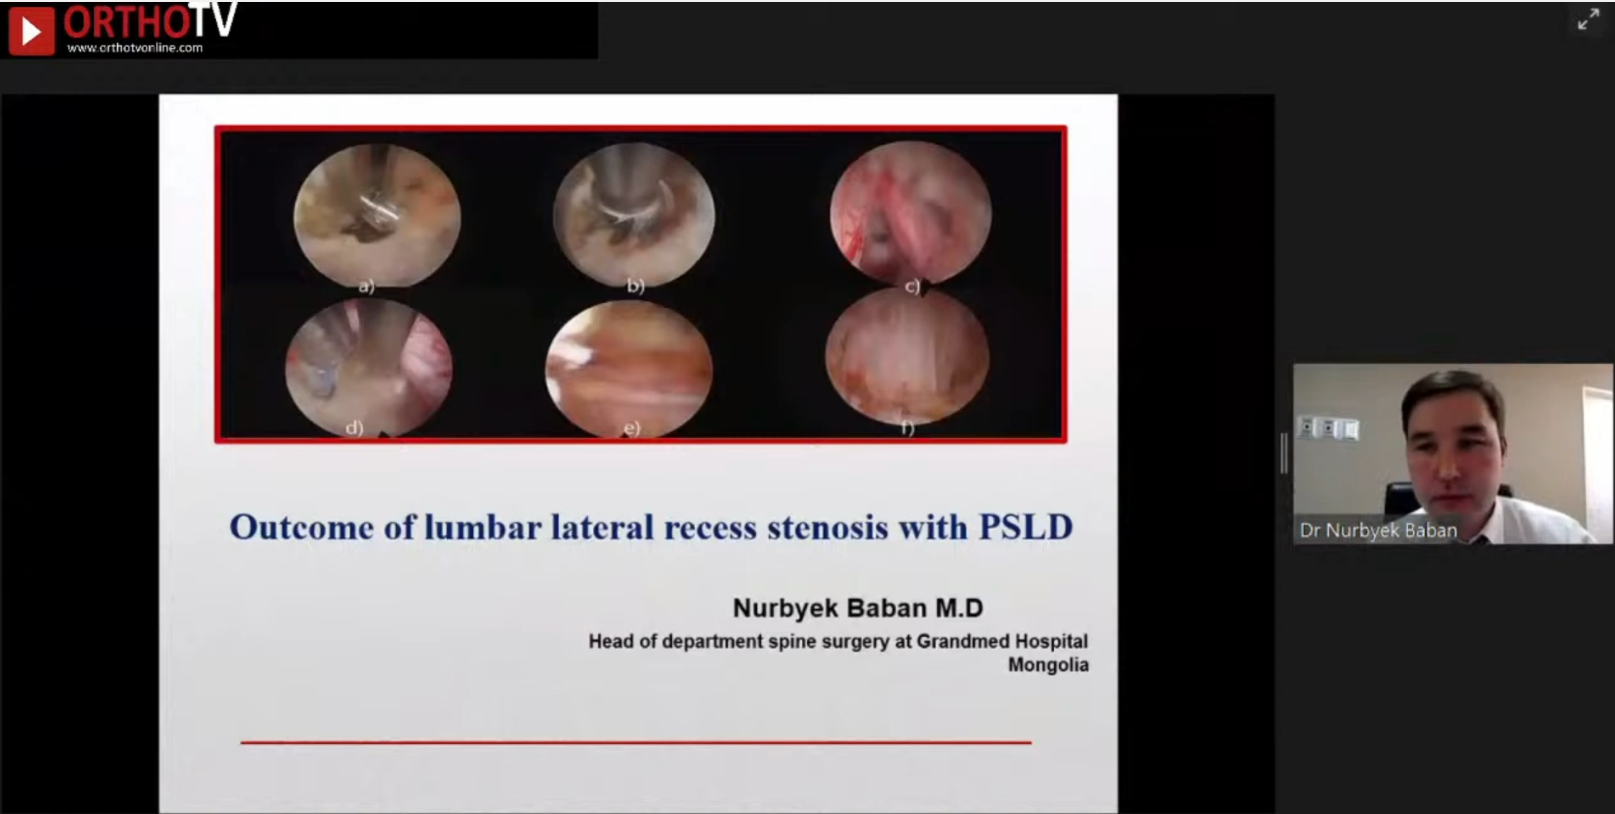 Outcome of Lumbar Later Recess Stenosis with PSLD Dr Nurbyek Baban Head of Department Spine Surgery at Grandmed Hospital, Mongolia